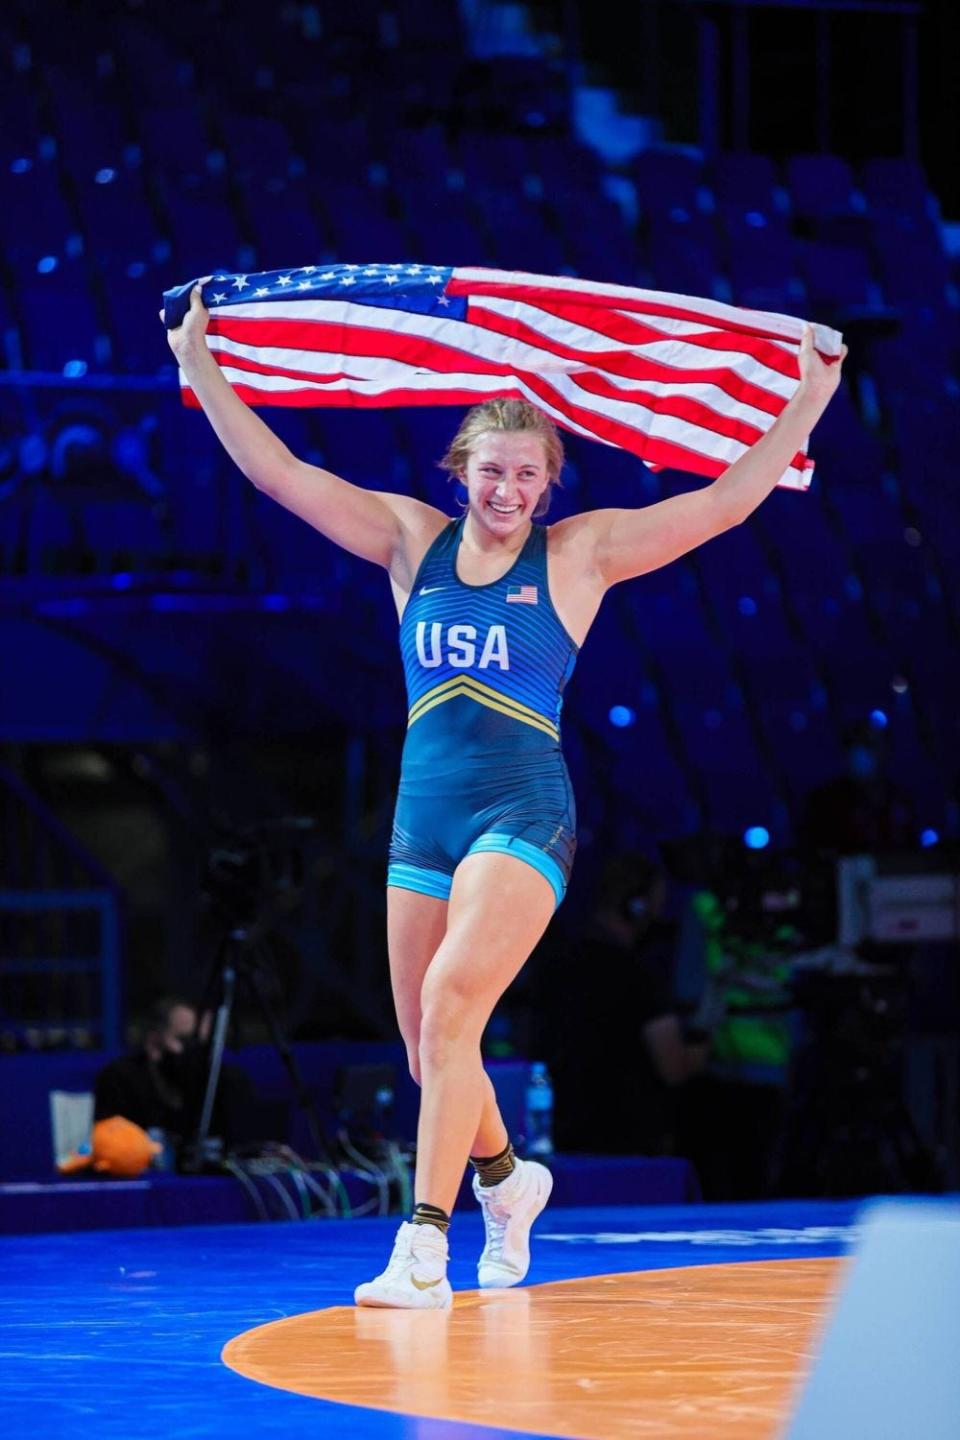 Kylie Welker, a Junior world champ, U23 world bronze medalist and Senior world team member, is the first recruit to sign with the Iowa women's wrestling program.